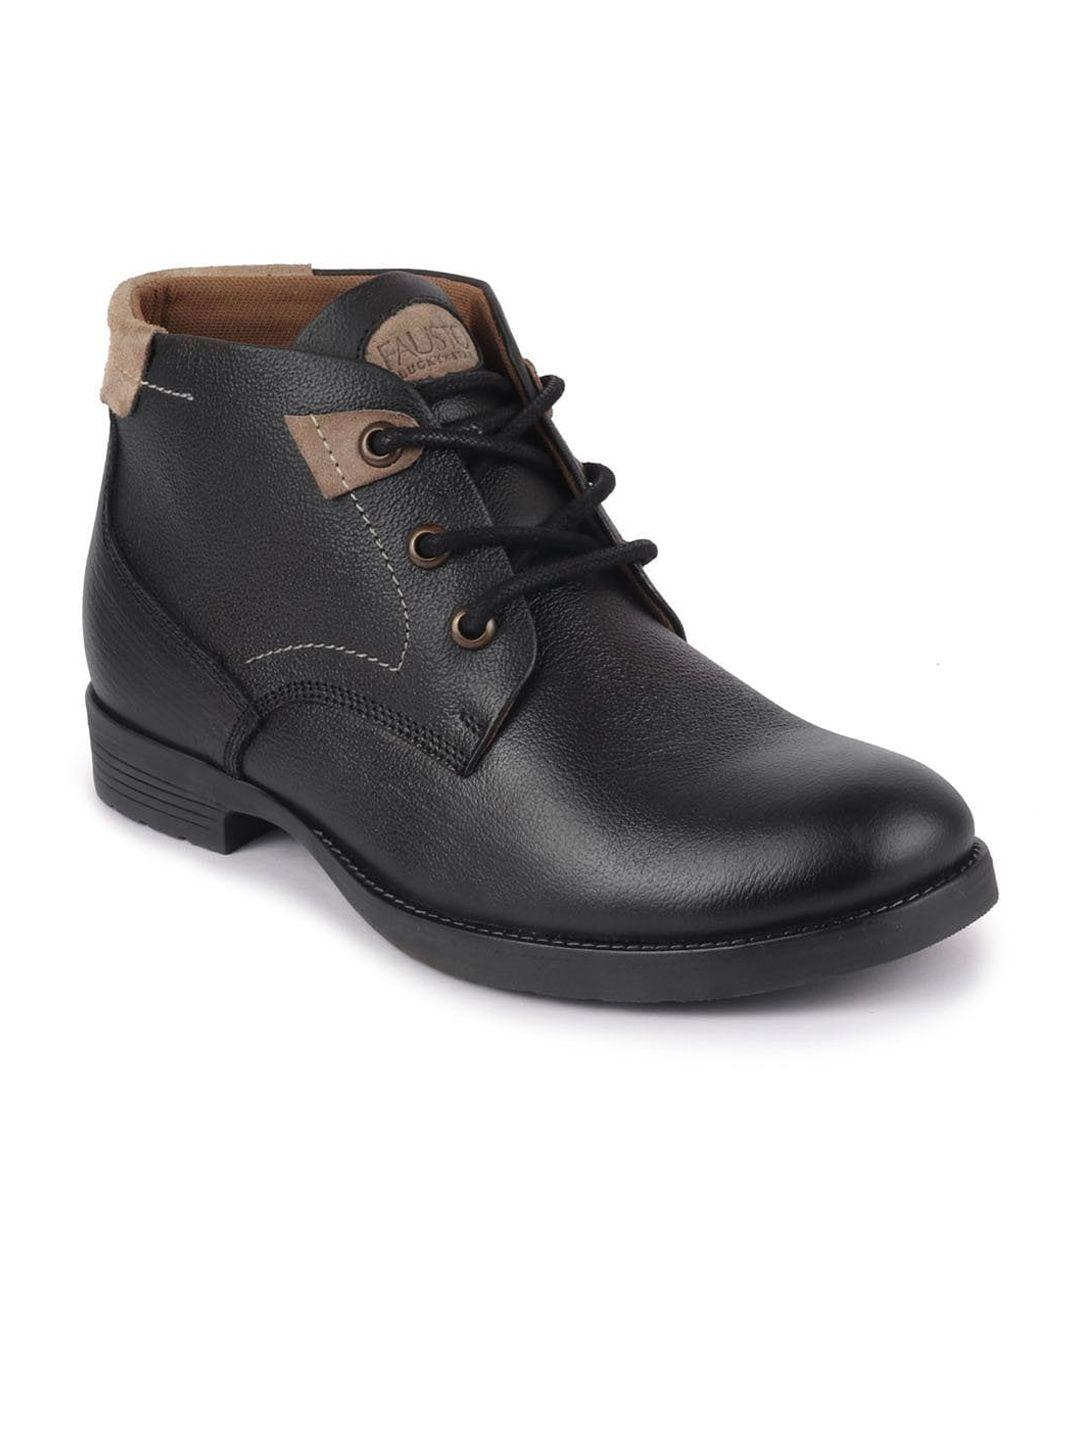 fausto men black solid leather casual flat boots